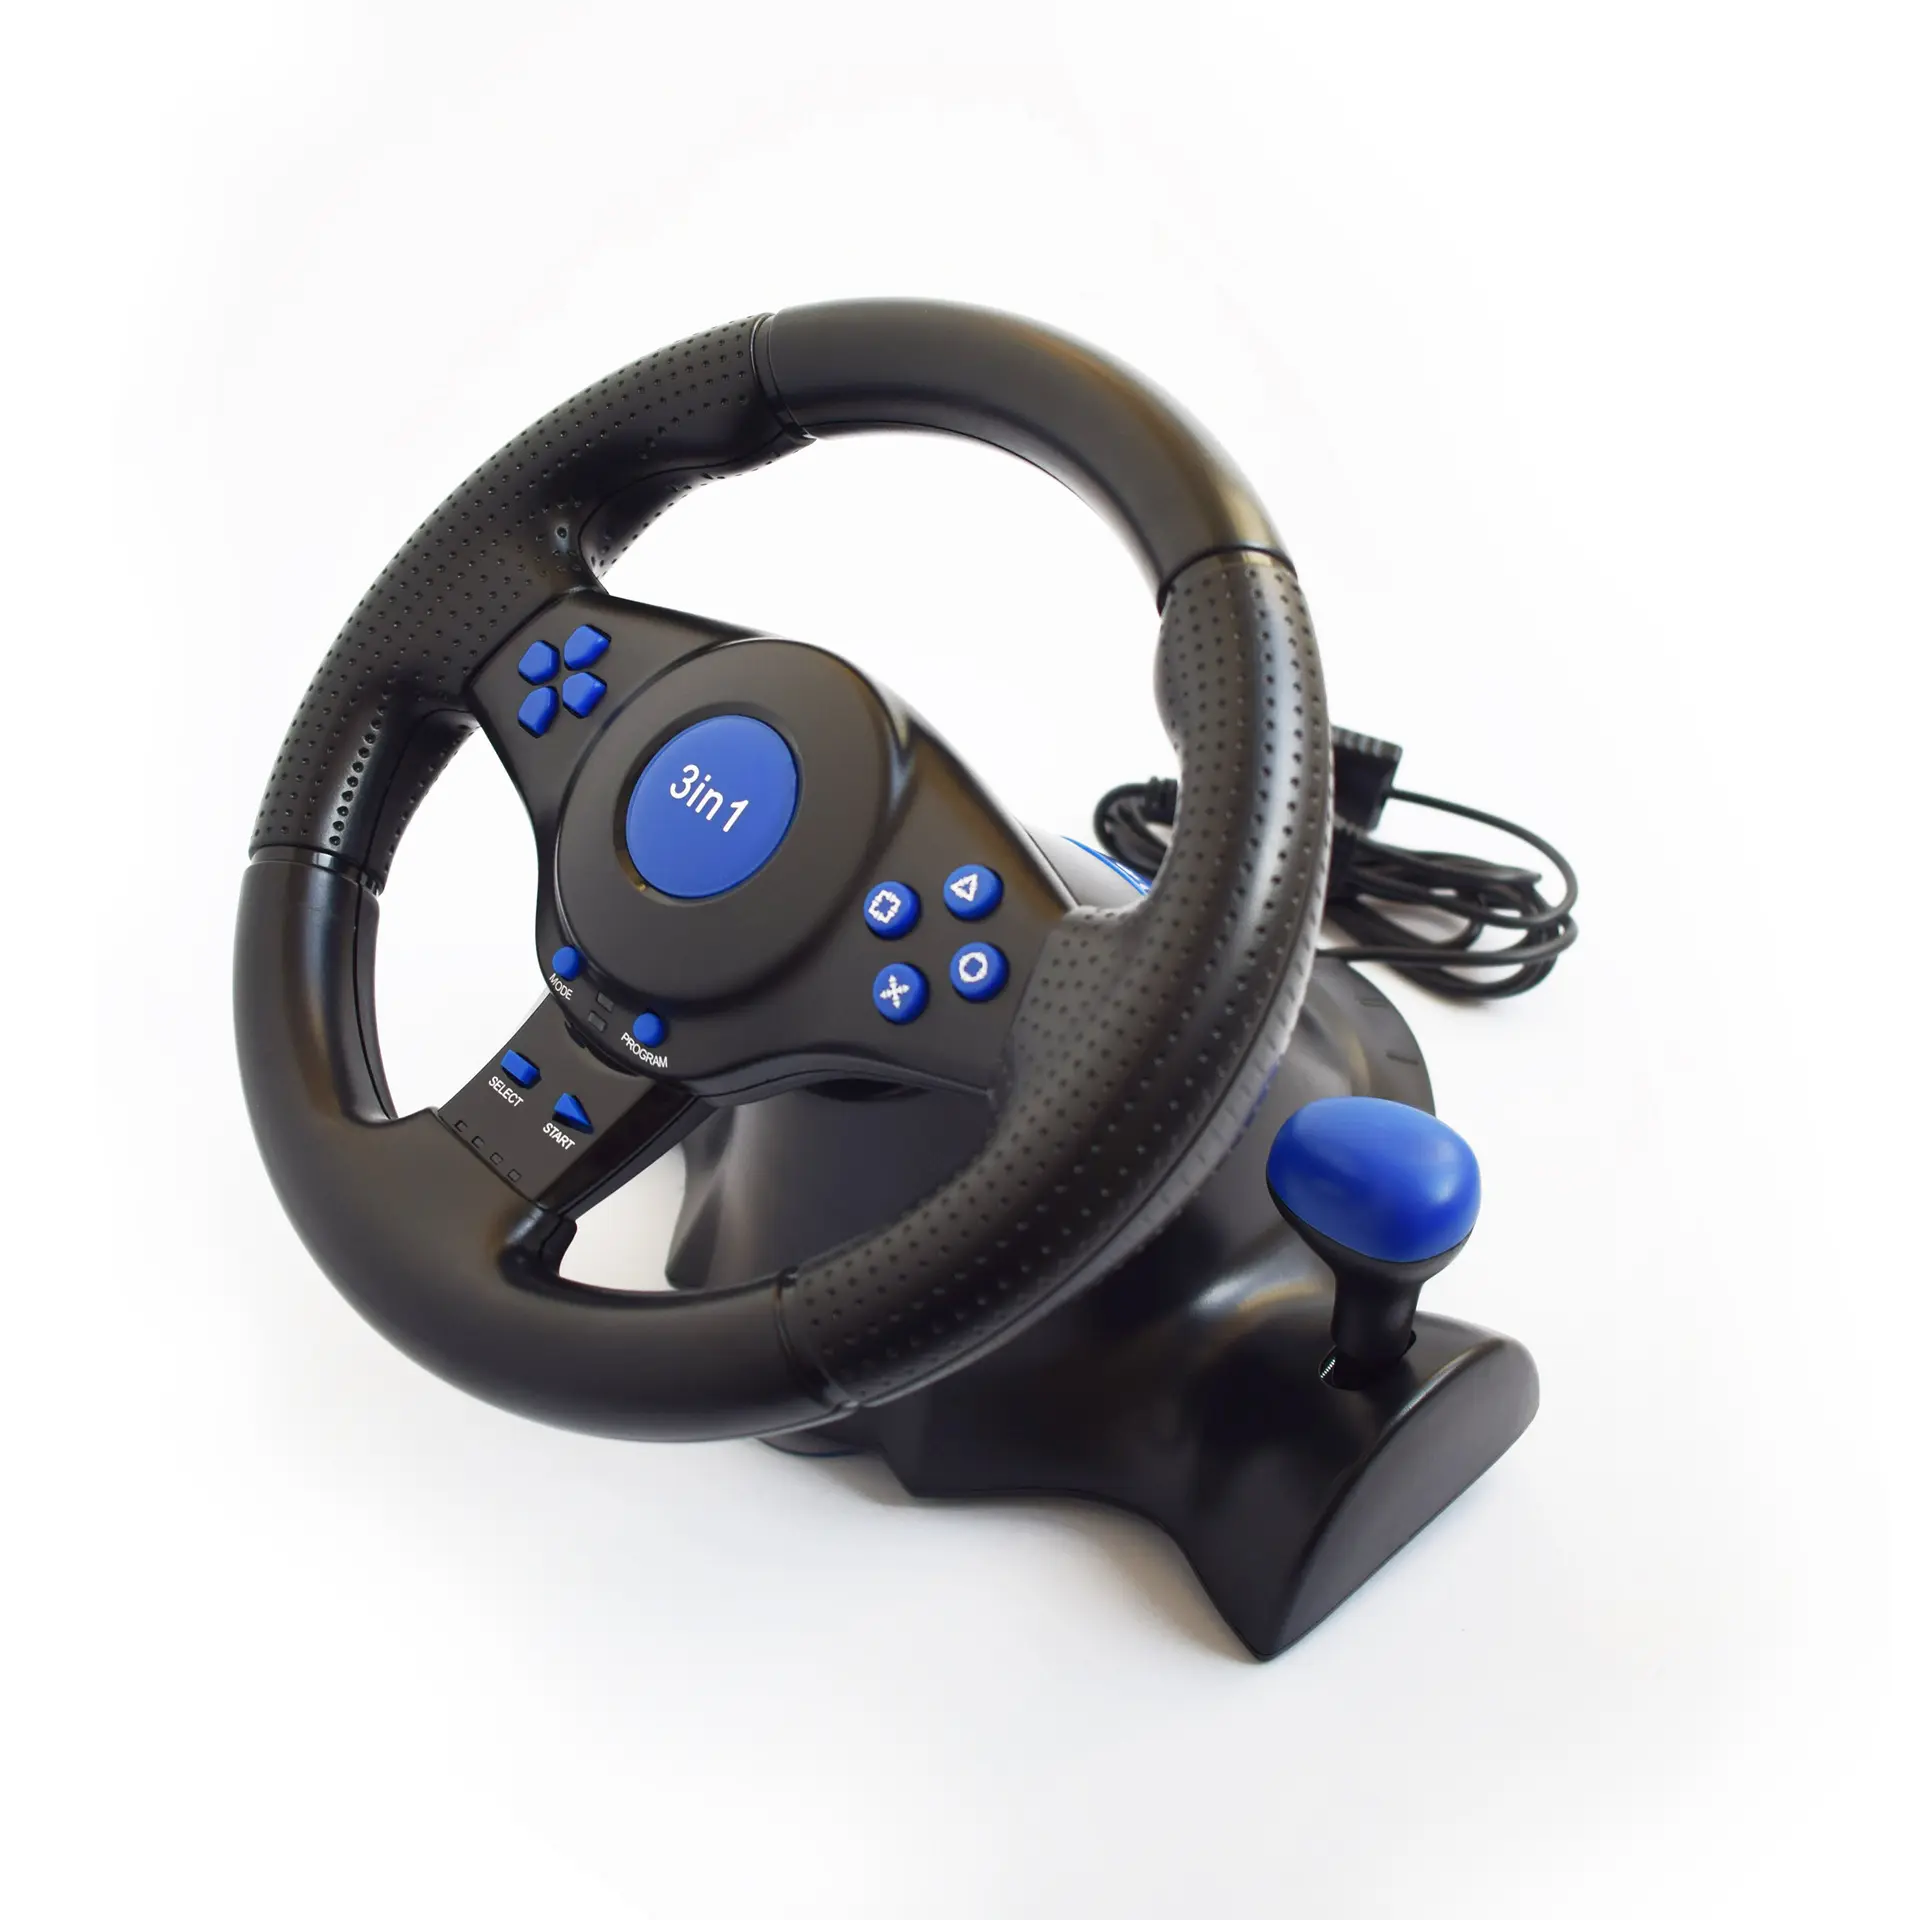 RALAN PS2 dual port usb for ps3 computer games steering wheel racing car with pedal system